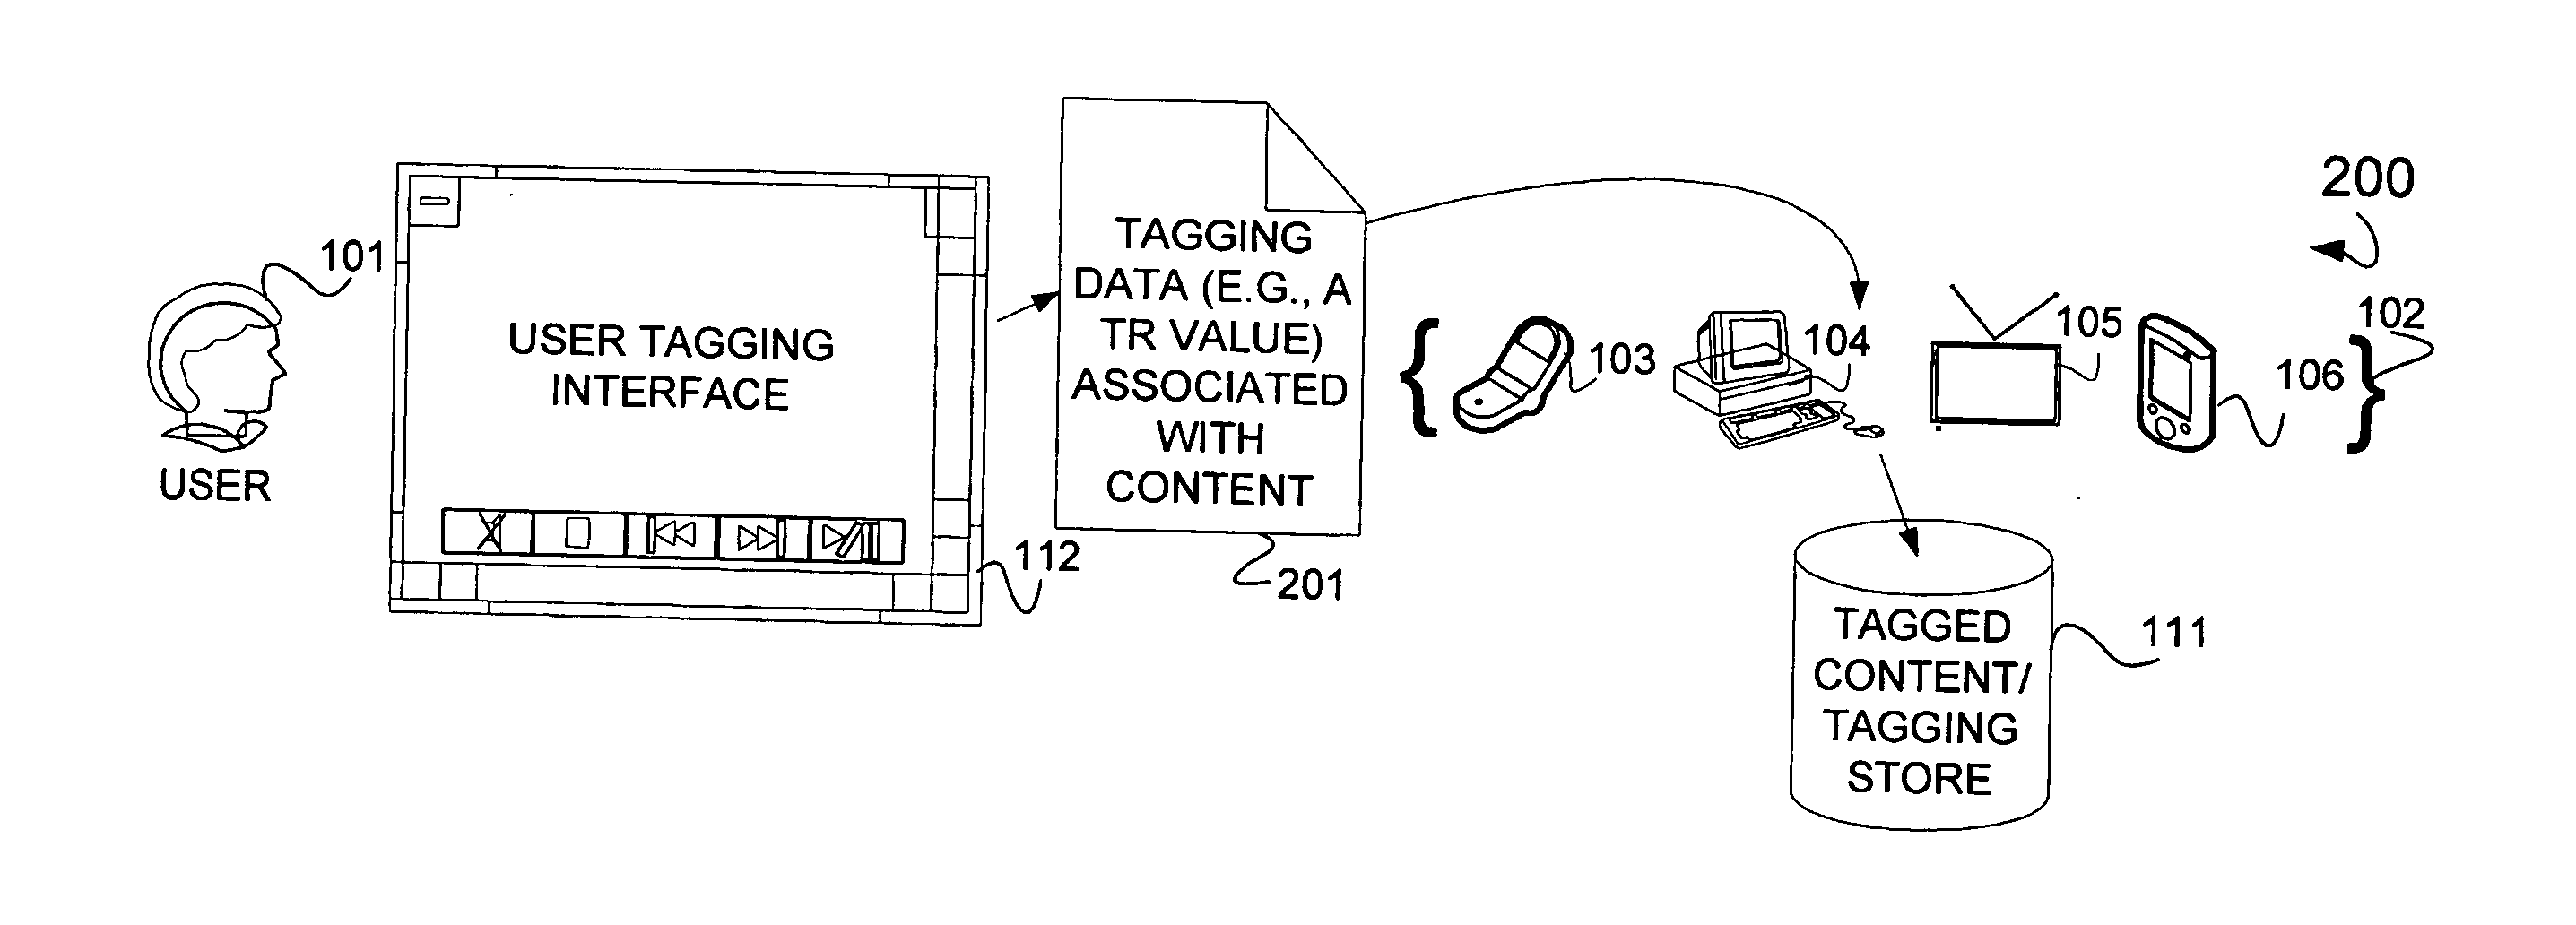 Audio/video content synchronization and display